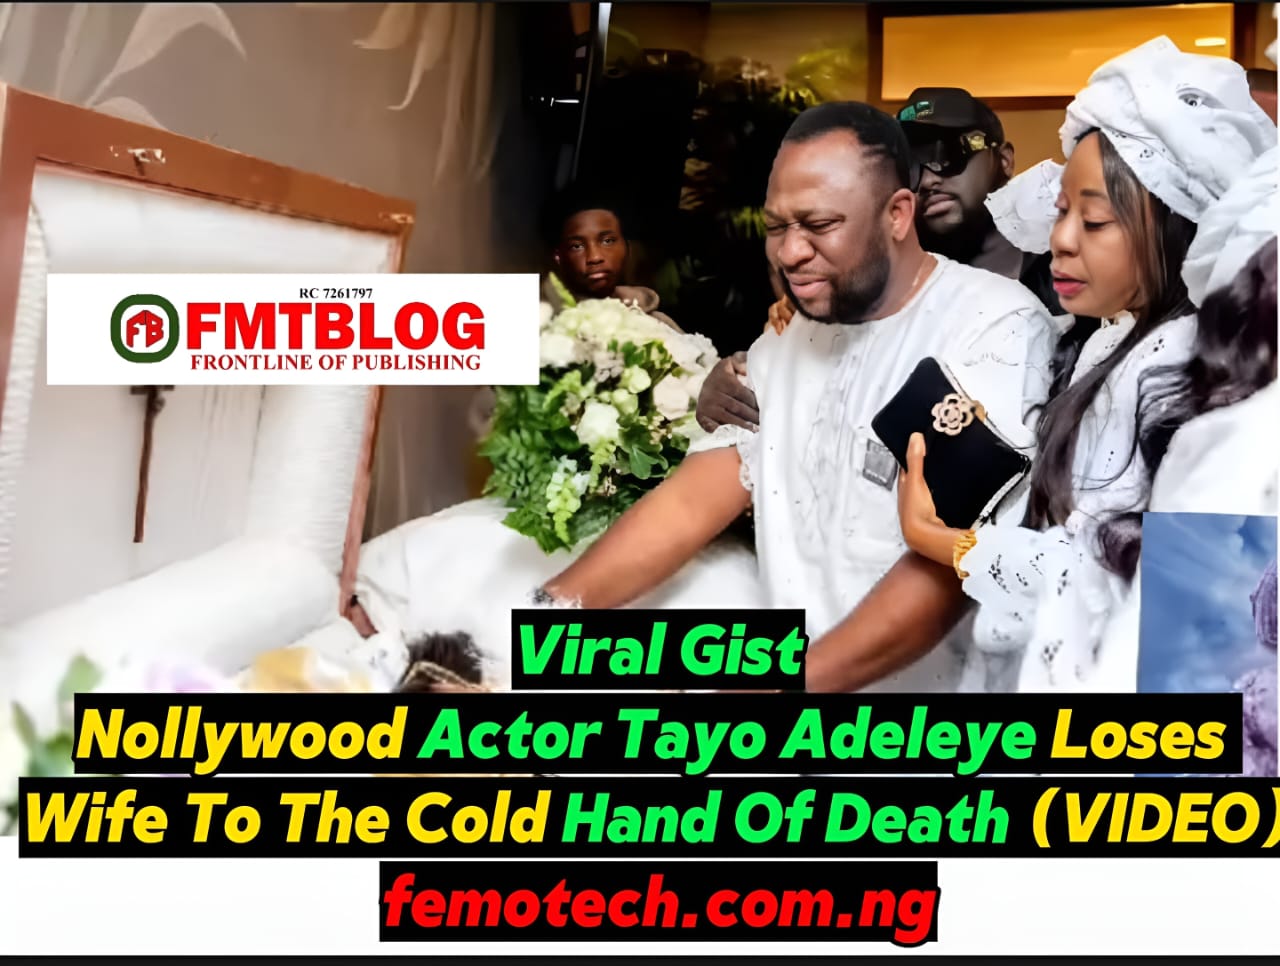 Nollywood Actor Tayo Adeleye Loses Wife To The Cold Hand Of Death (VIDEO)